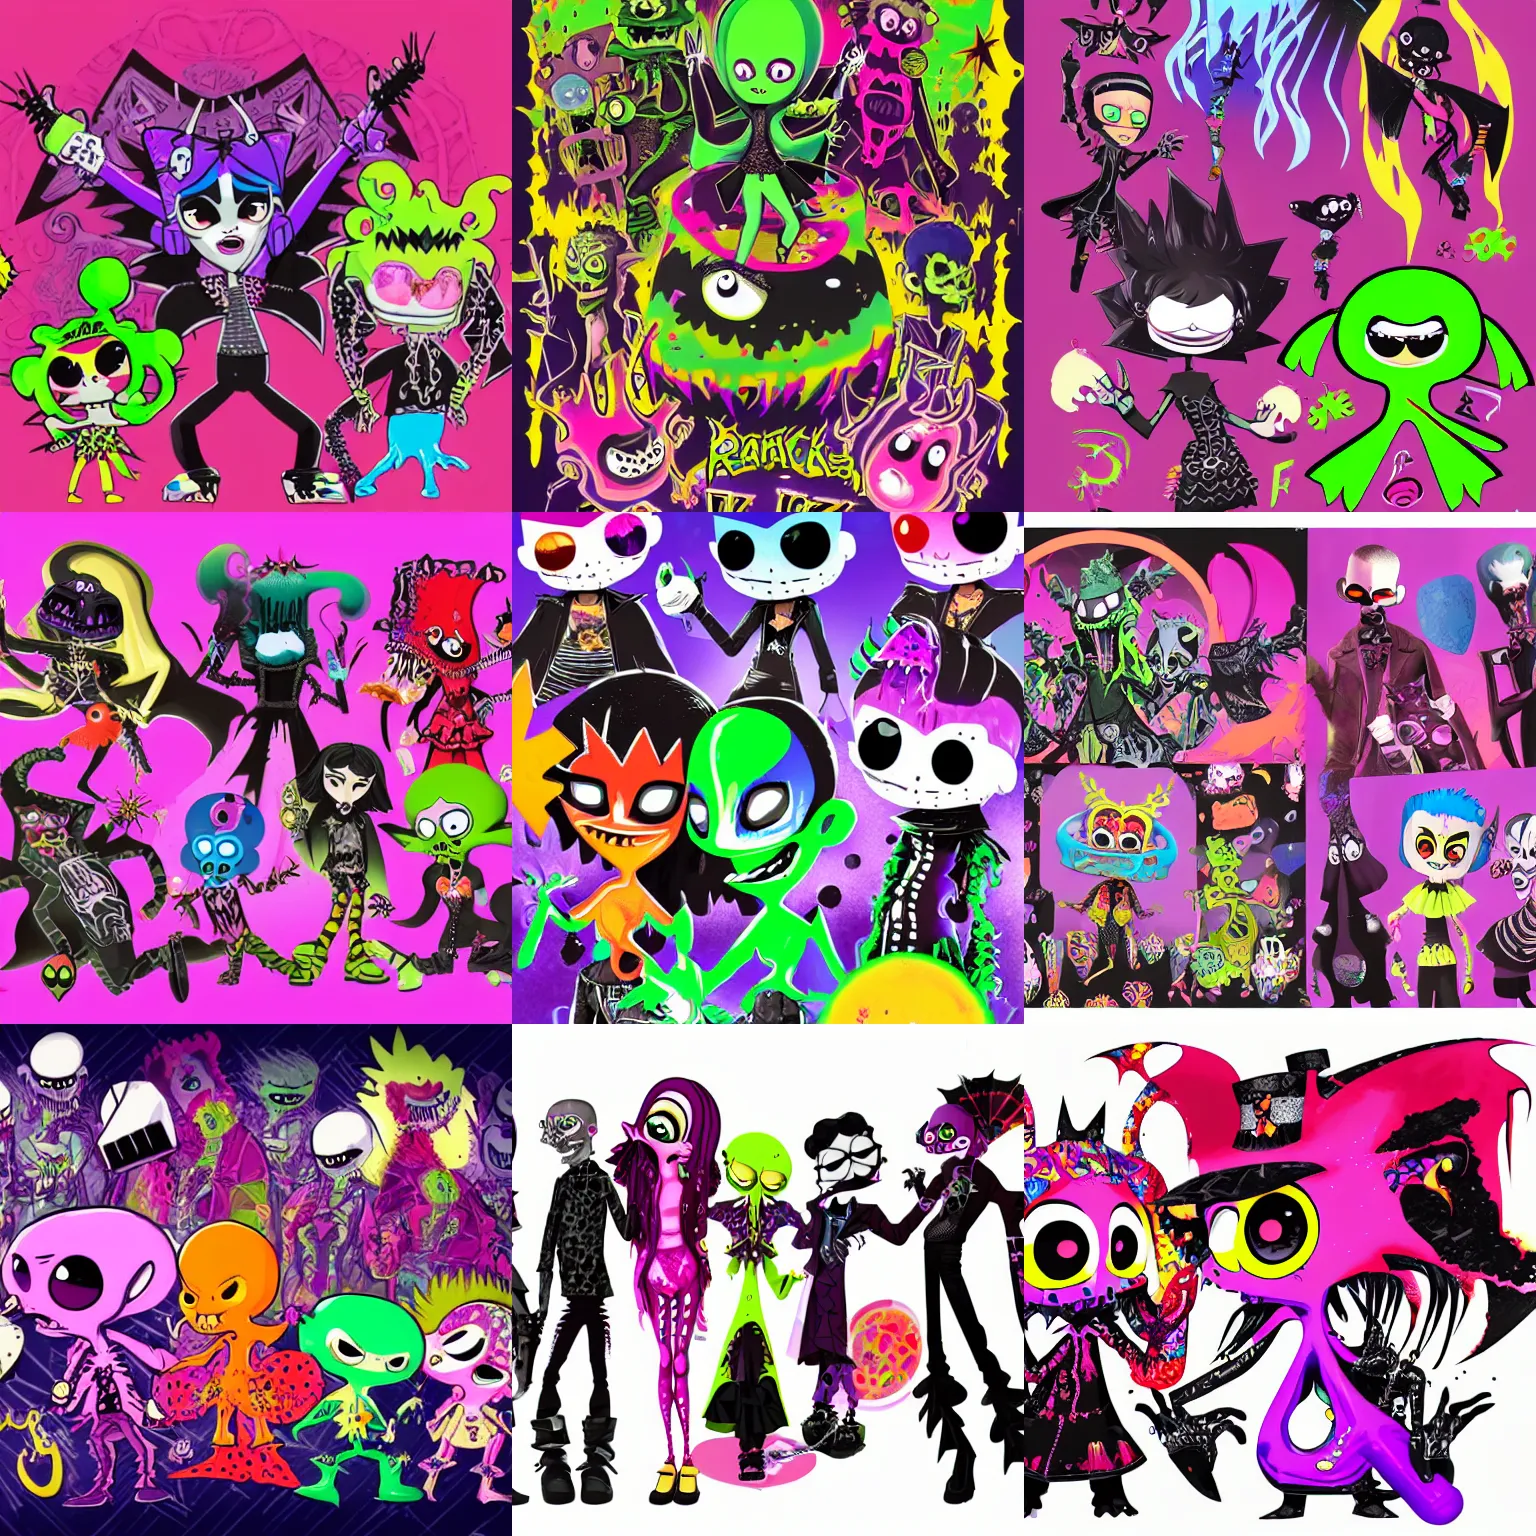 Prompt: lisa frank gothic punk vampiric rockstar vampire squid concept character designs of various shapes and sizes by genndy tartakovsky and the creators of fret nice at pieces interactive and splatoon by nintendo and the psychonauts by doublefine tim shafer artists for the new hotel transylvania film